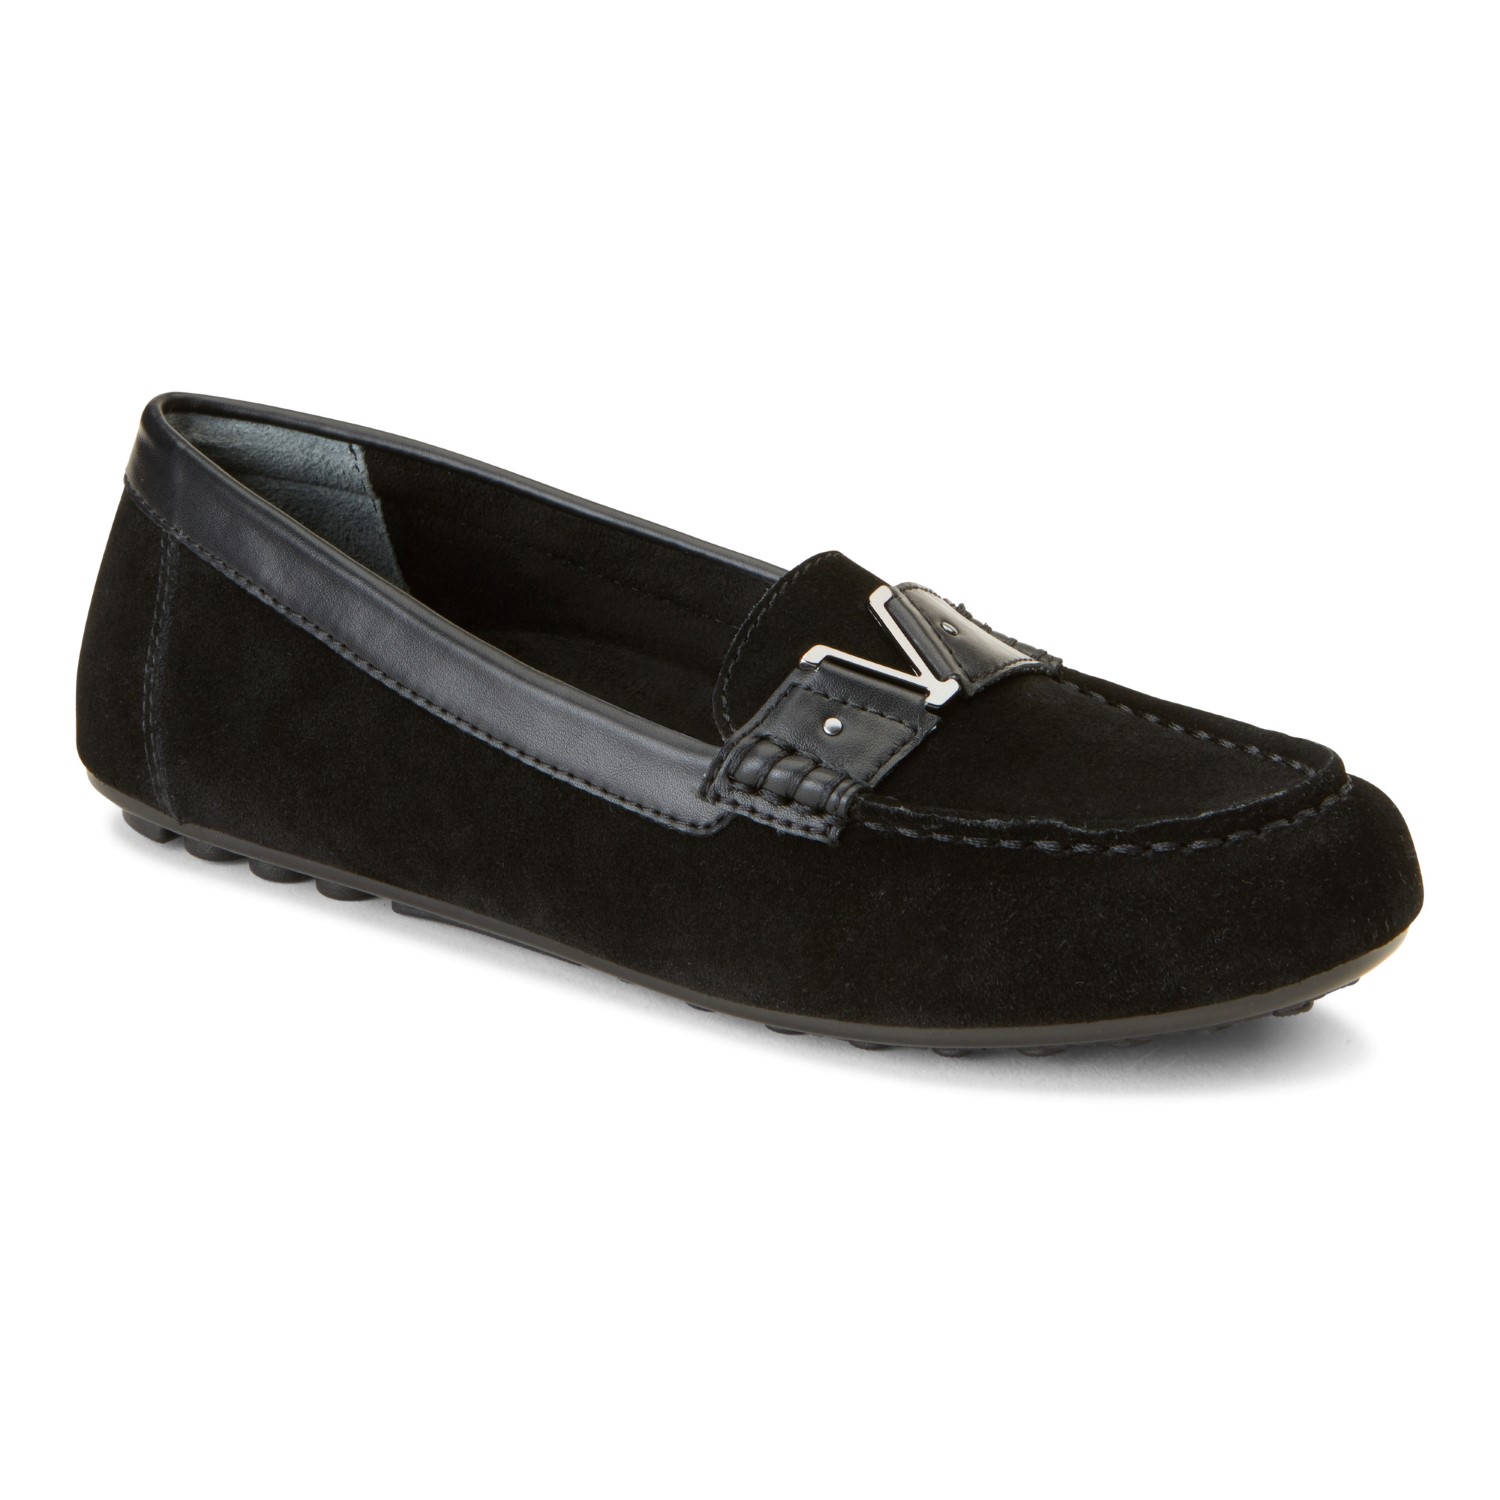 Vionic Hilo Women's Supportive Moccasin